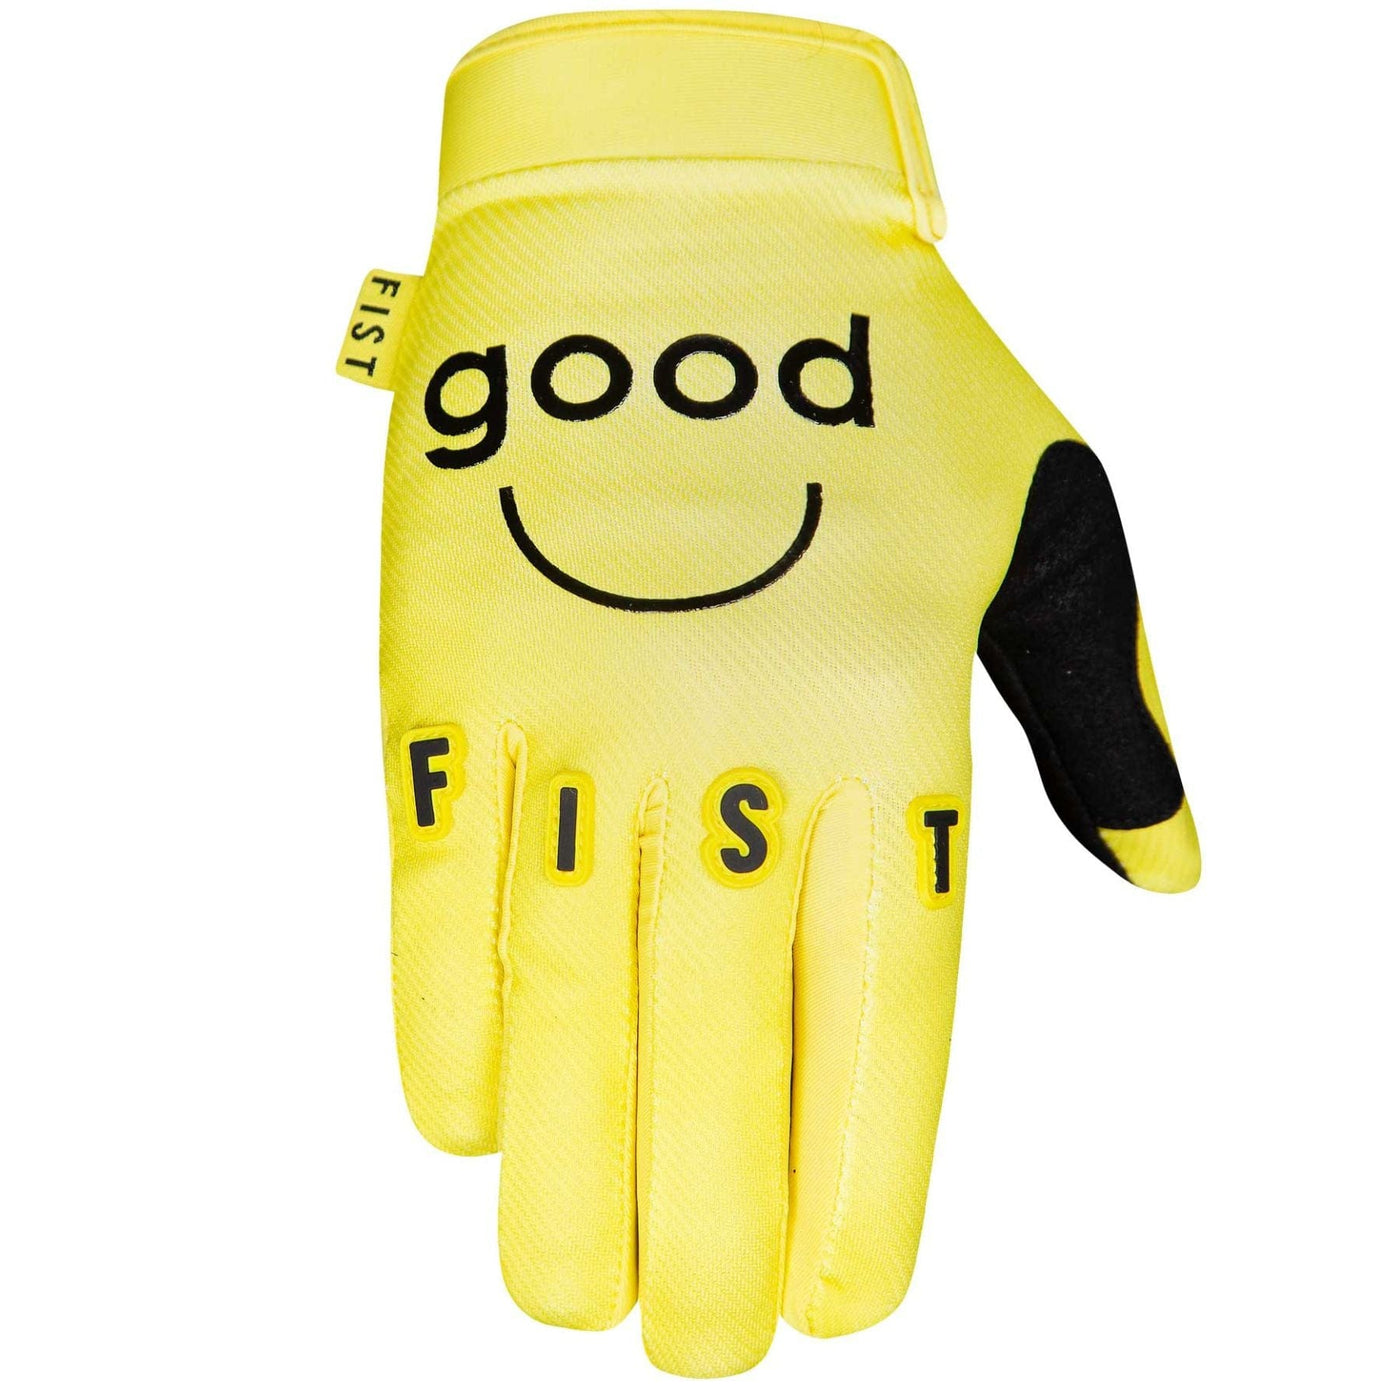 FIST Youth Gloves Cooper Chapman - Good Human Factory 8Lines Shop - Fast Shipping